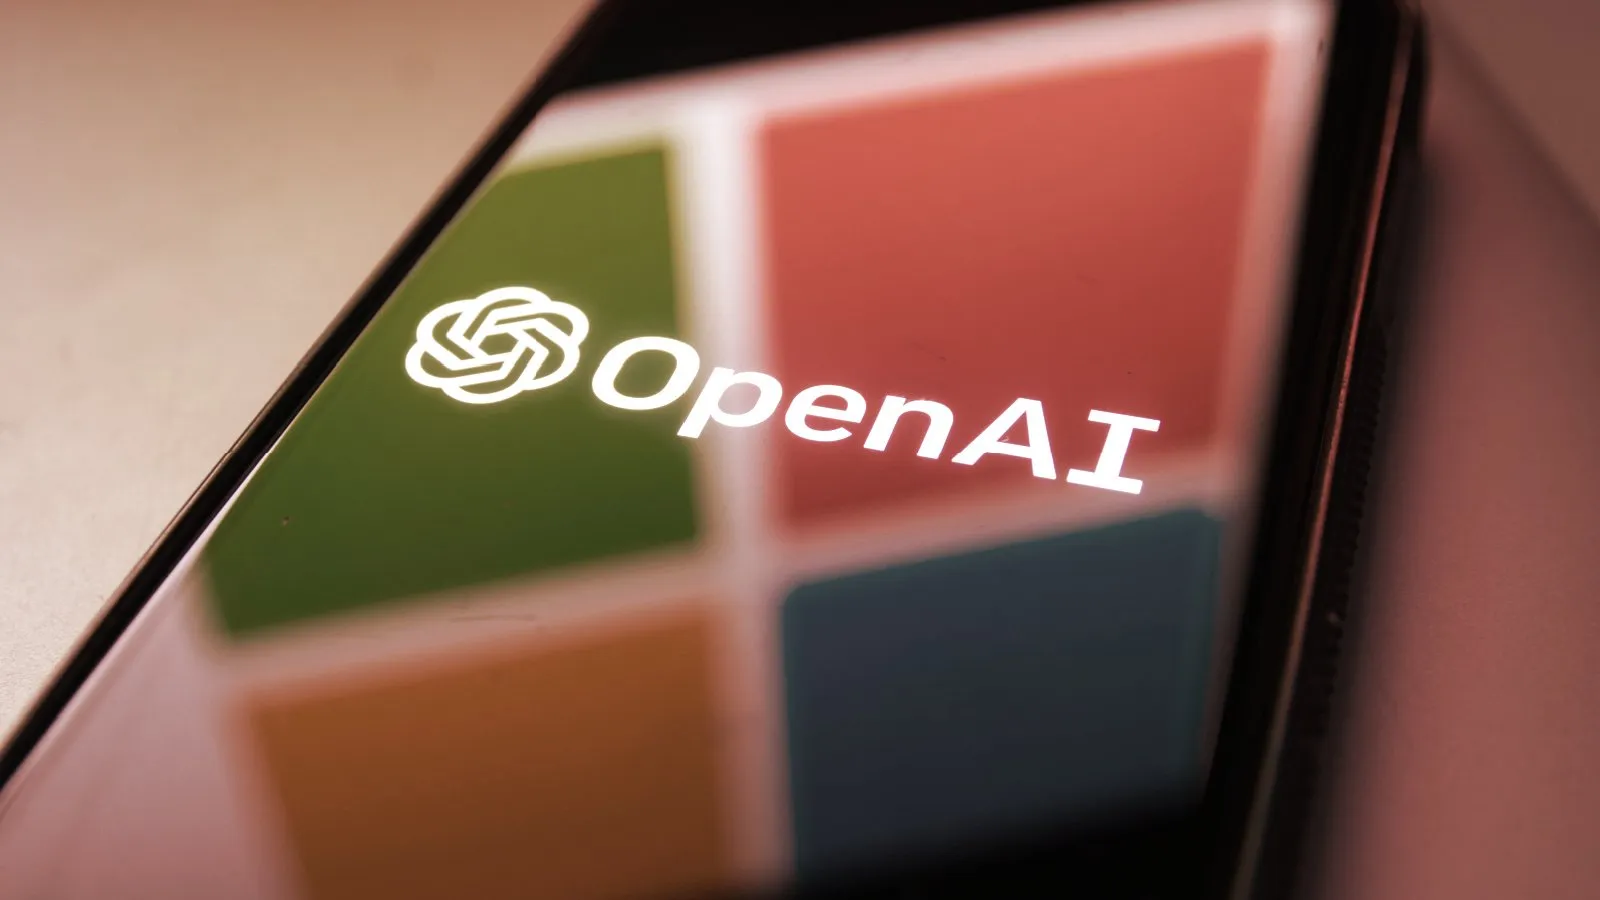 OpenAI, founded by Sam Altman, is the maker of ChatGPT. Image: Shutterstock